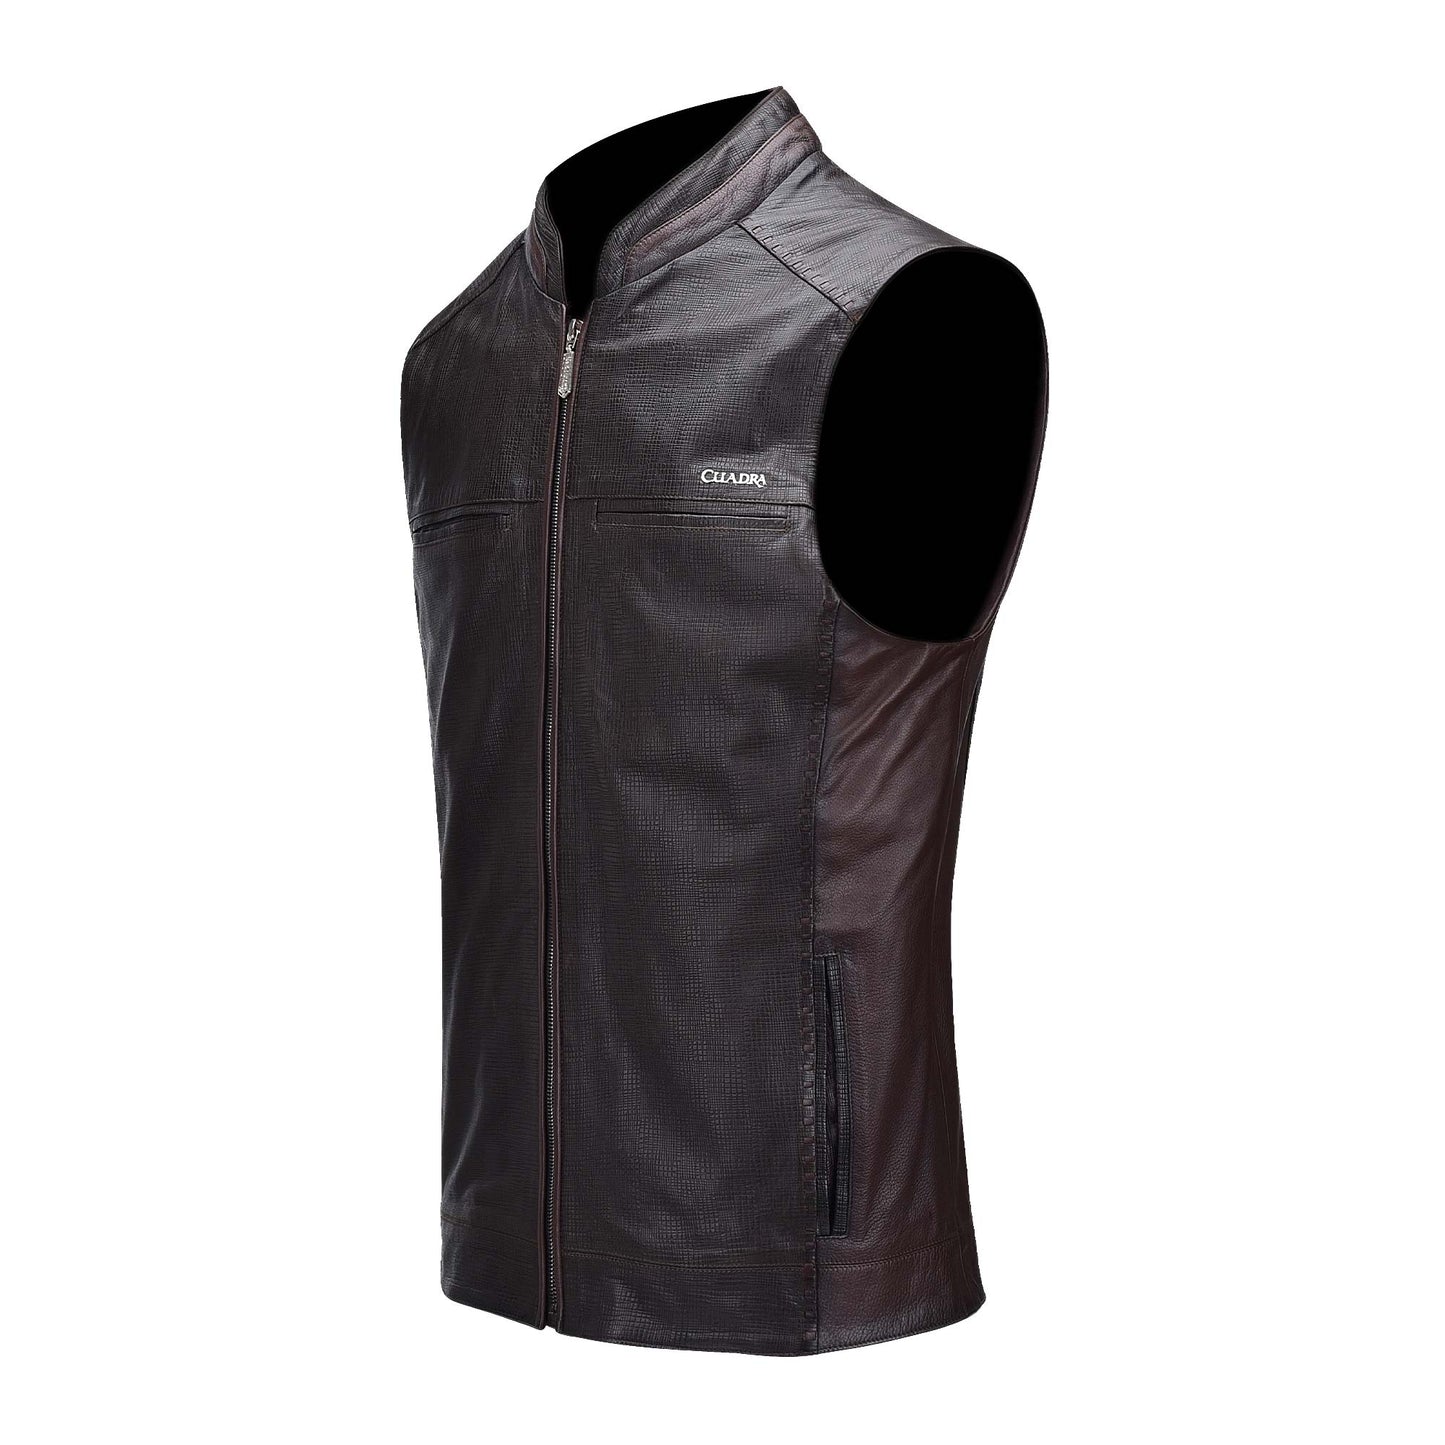 H239COC - Cuadra brown casual leather vest for men